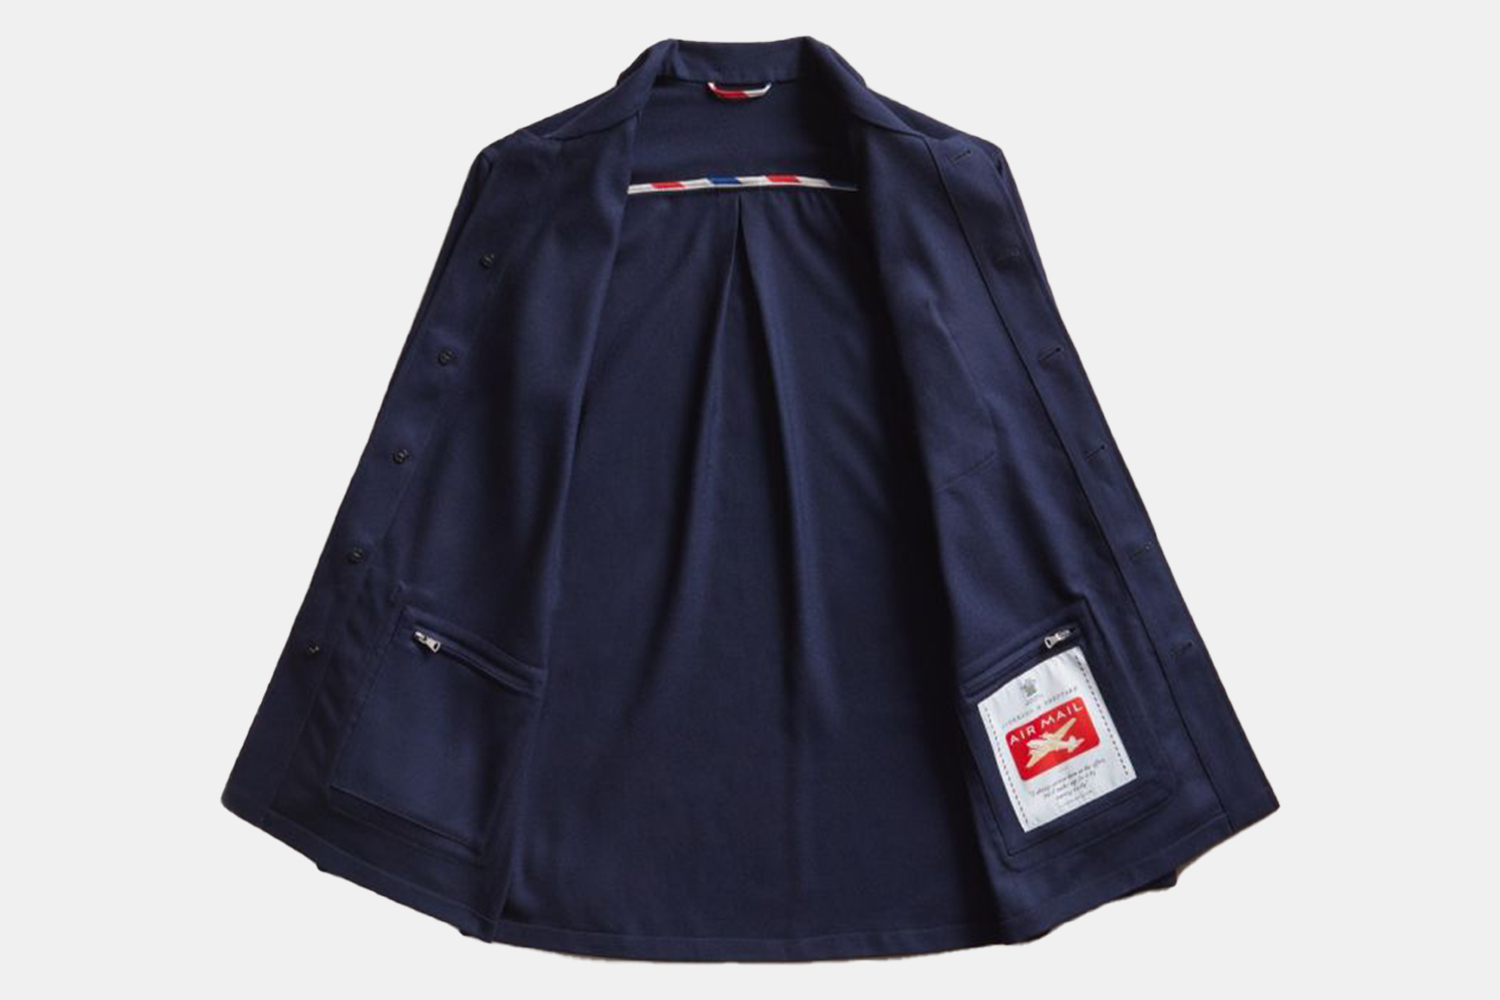 An Air Mail themed jacket